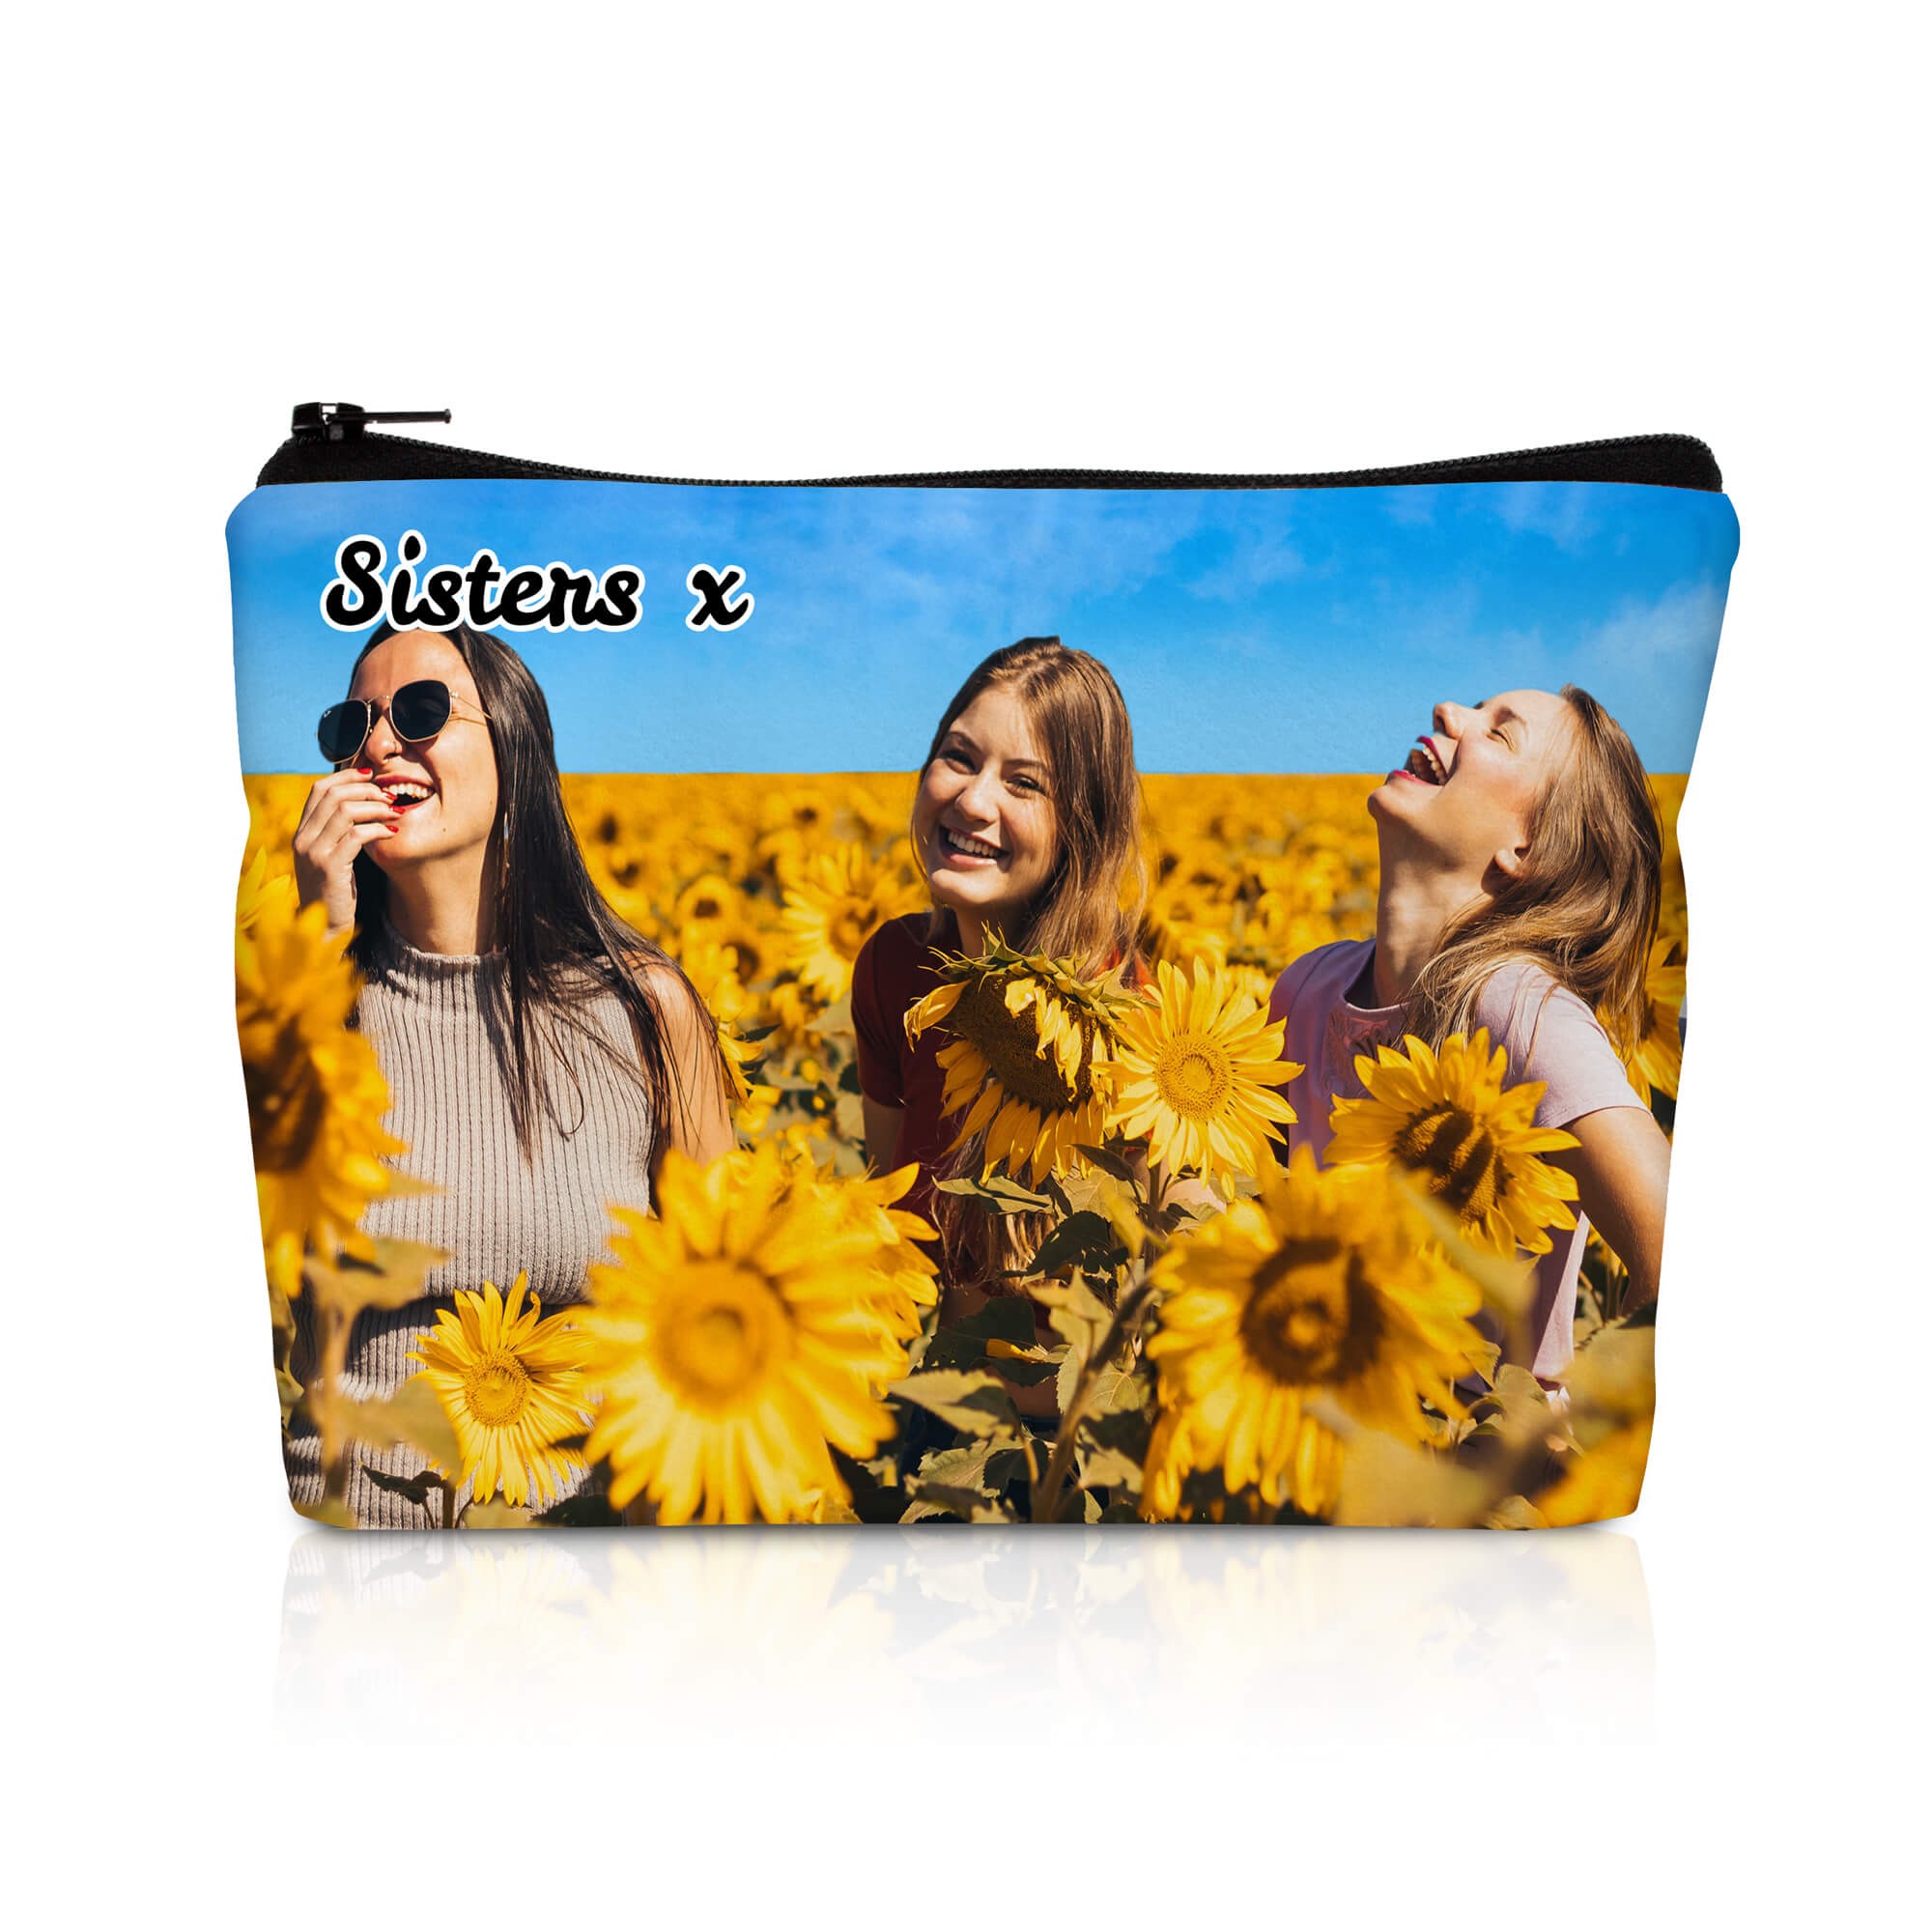 Beautiful, Personalised Makeup, Cosmetic Bag Pouch in UK